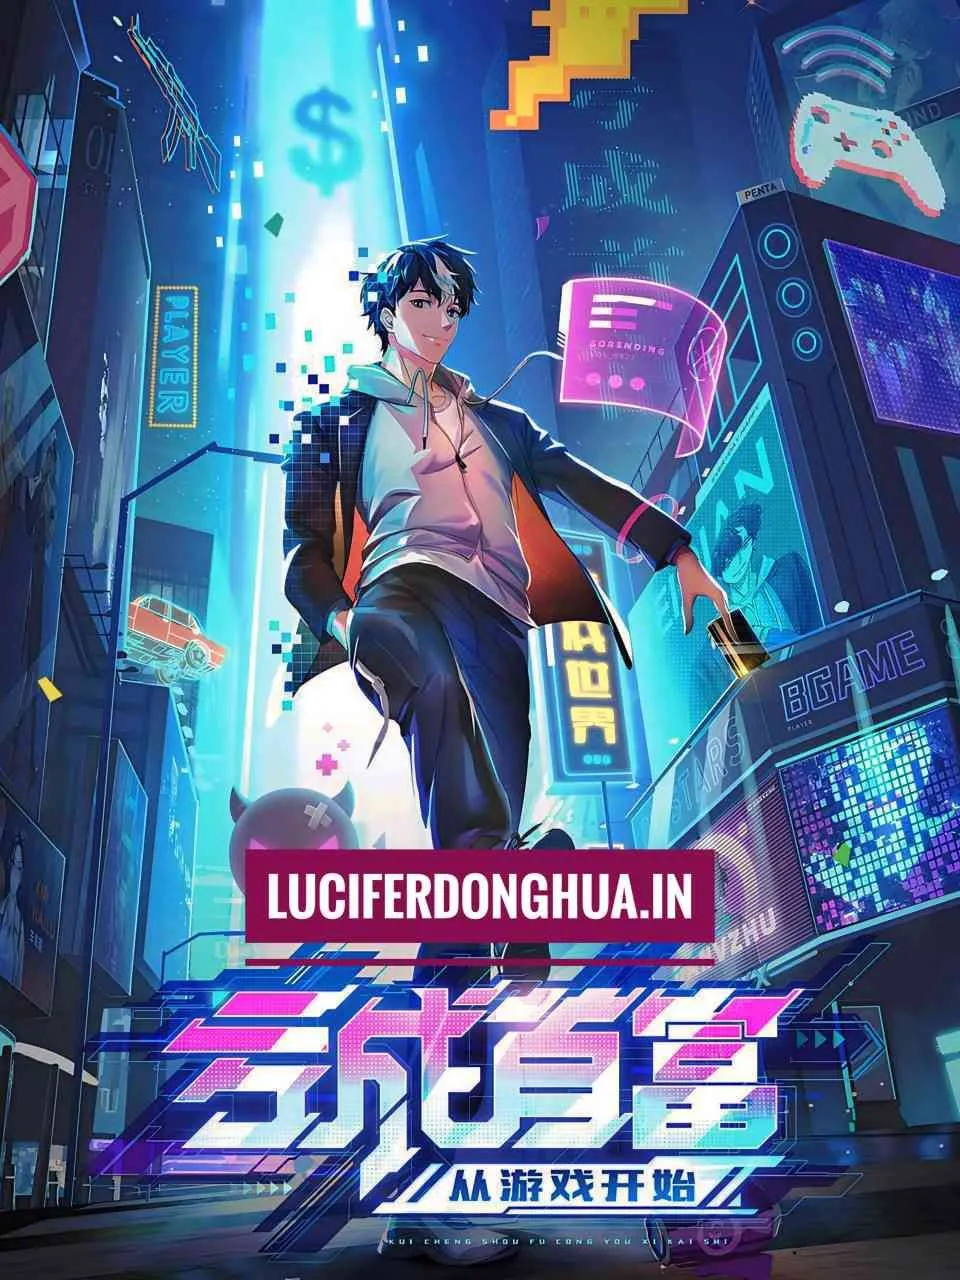 the-richest-man-in-game-2024-lcuifer-donghua-chnese-anime (1)